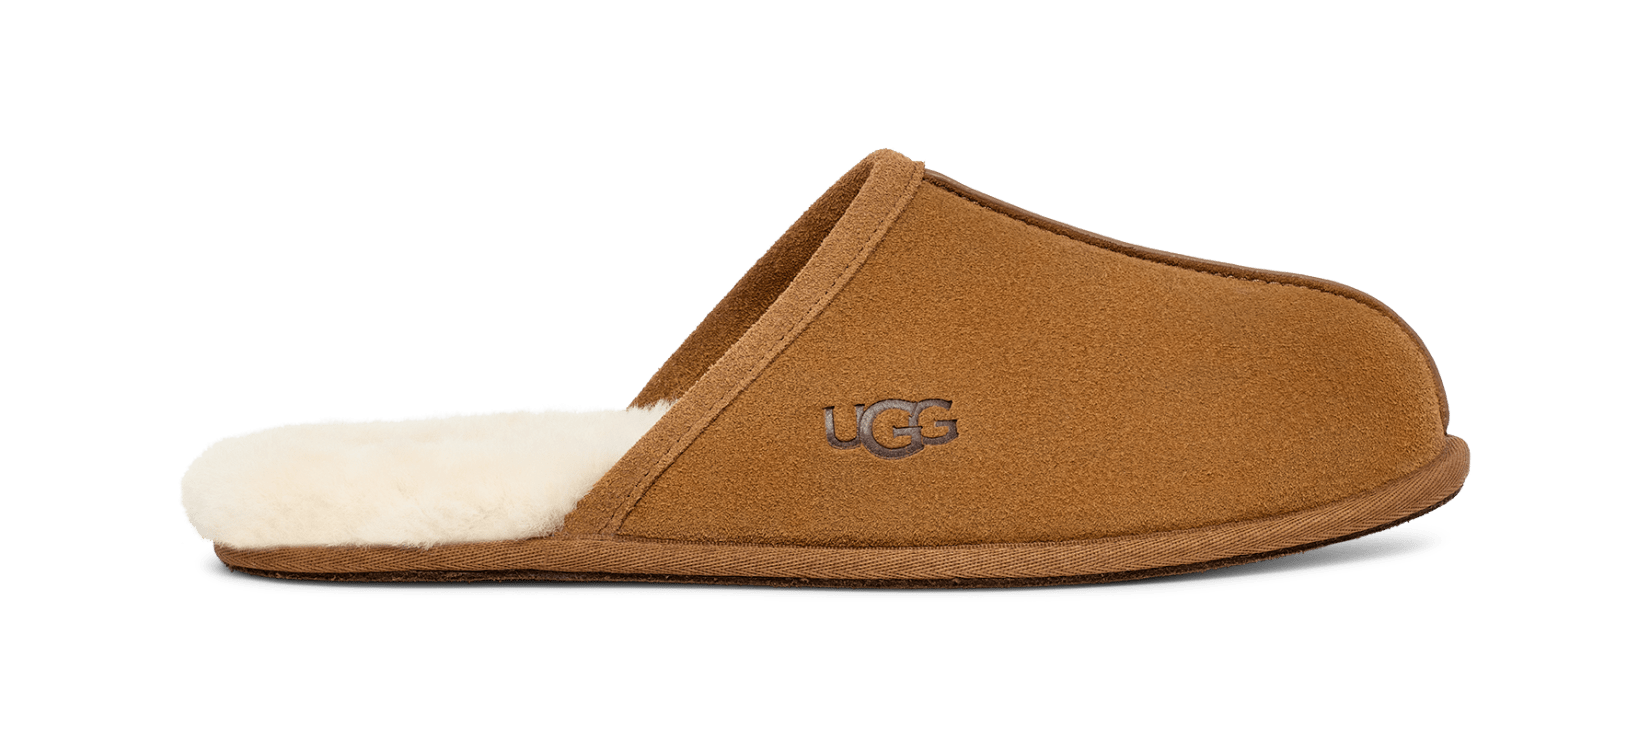 SNUGRUGS Ladies Cotton Lined Tan Suede Moccasin Slippers with Hard Sole.  Size 4: Amazon.co.uk: Fashion